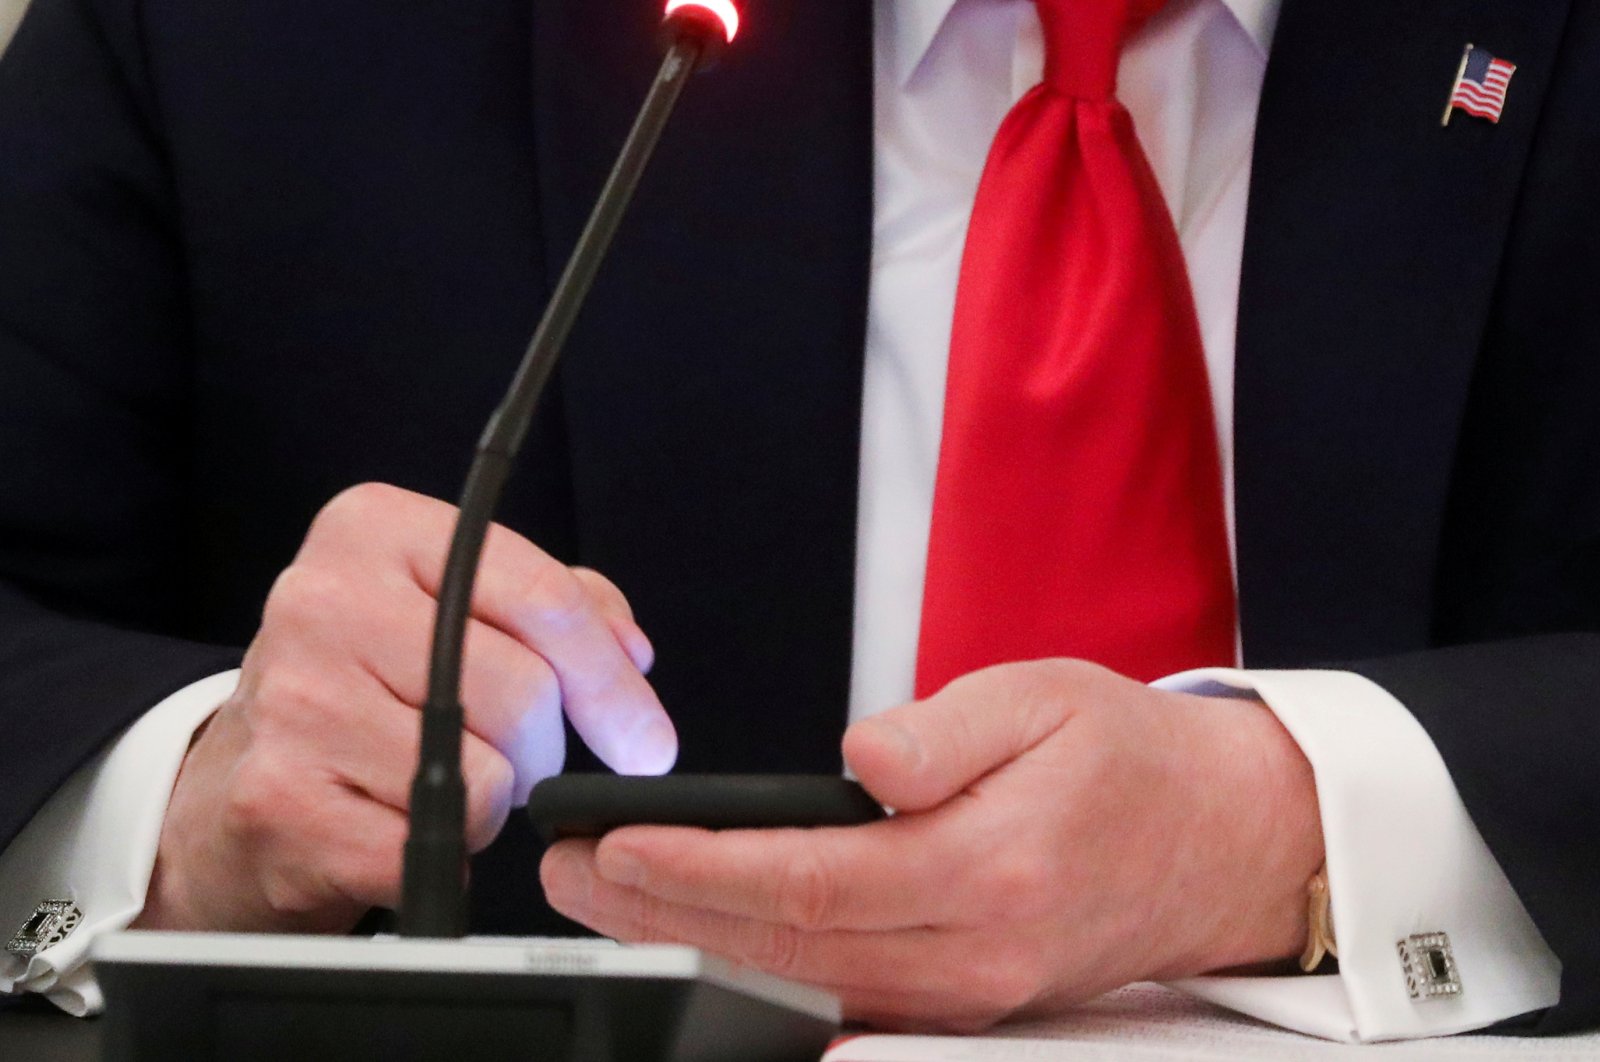 US President Donald Trump taps the screen on a mobile phone at the approximate time a tweet was released from his Twitter account, during a roundtable discussion on the reopening of small businesses in the State Dining Room at the White House in Washington, U.S., June 18, 2020. (Reuters Photo)